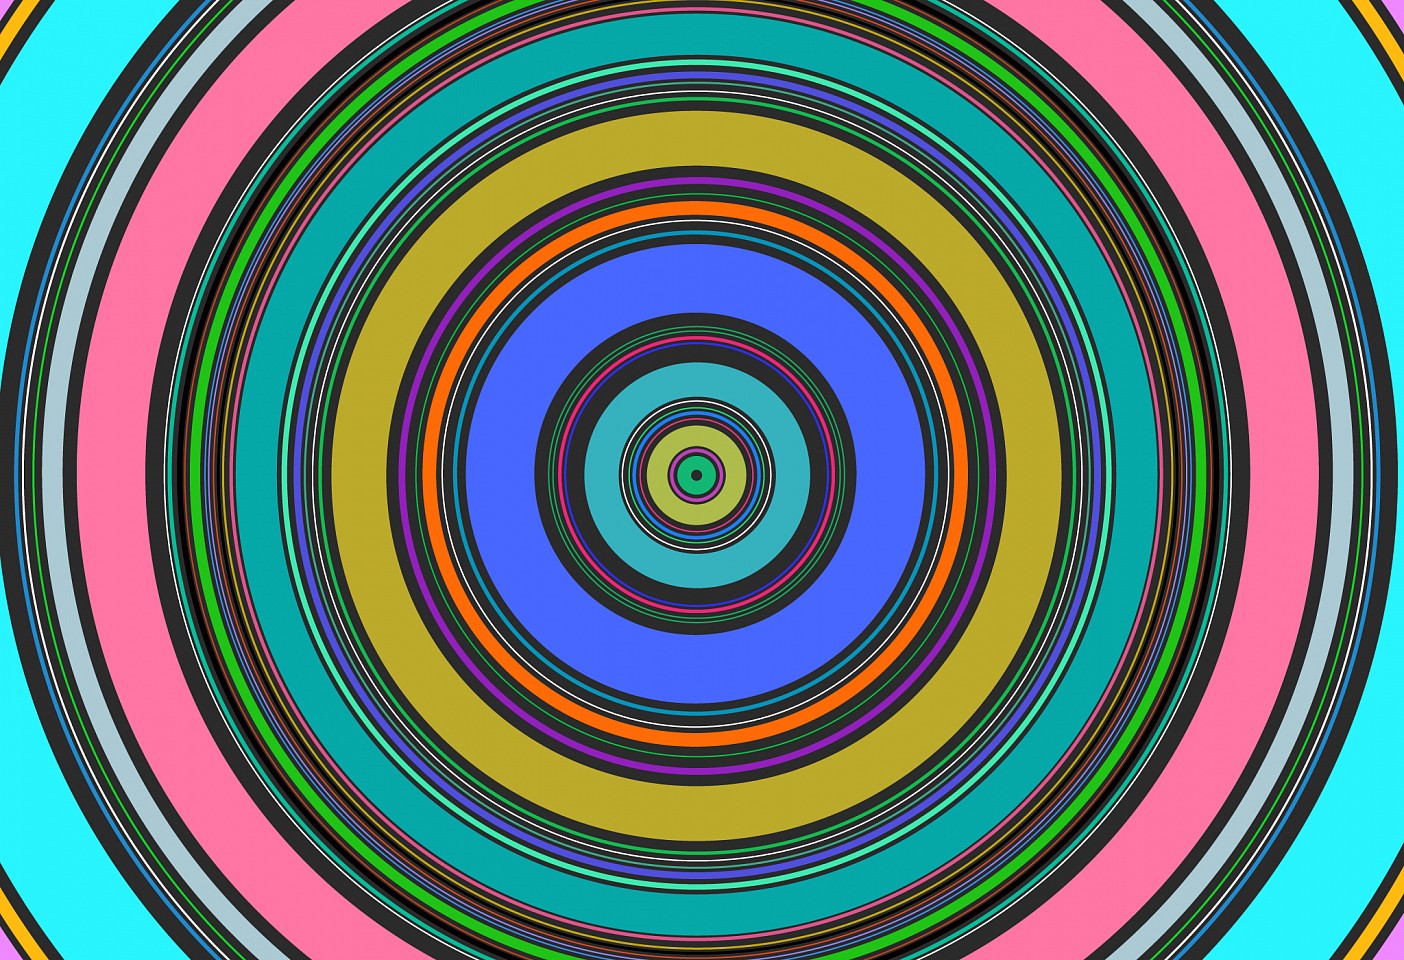 Dane Albert, Circles #37 Night, 2023
Acrylic on canvas (Concept), 48 x 72 in. (121.9 x 182.9 cm)
Series of colored lines and shapes in multiple configurations
DA.2023-037-night